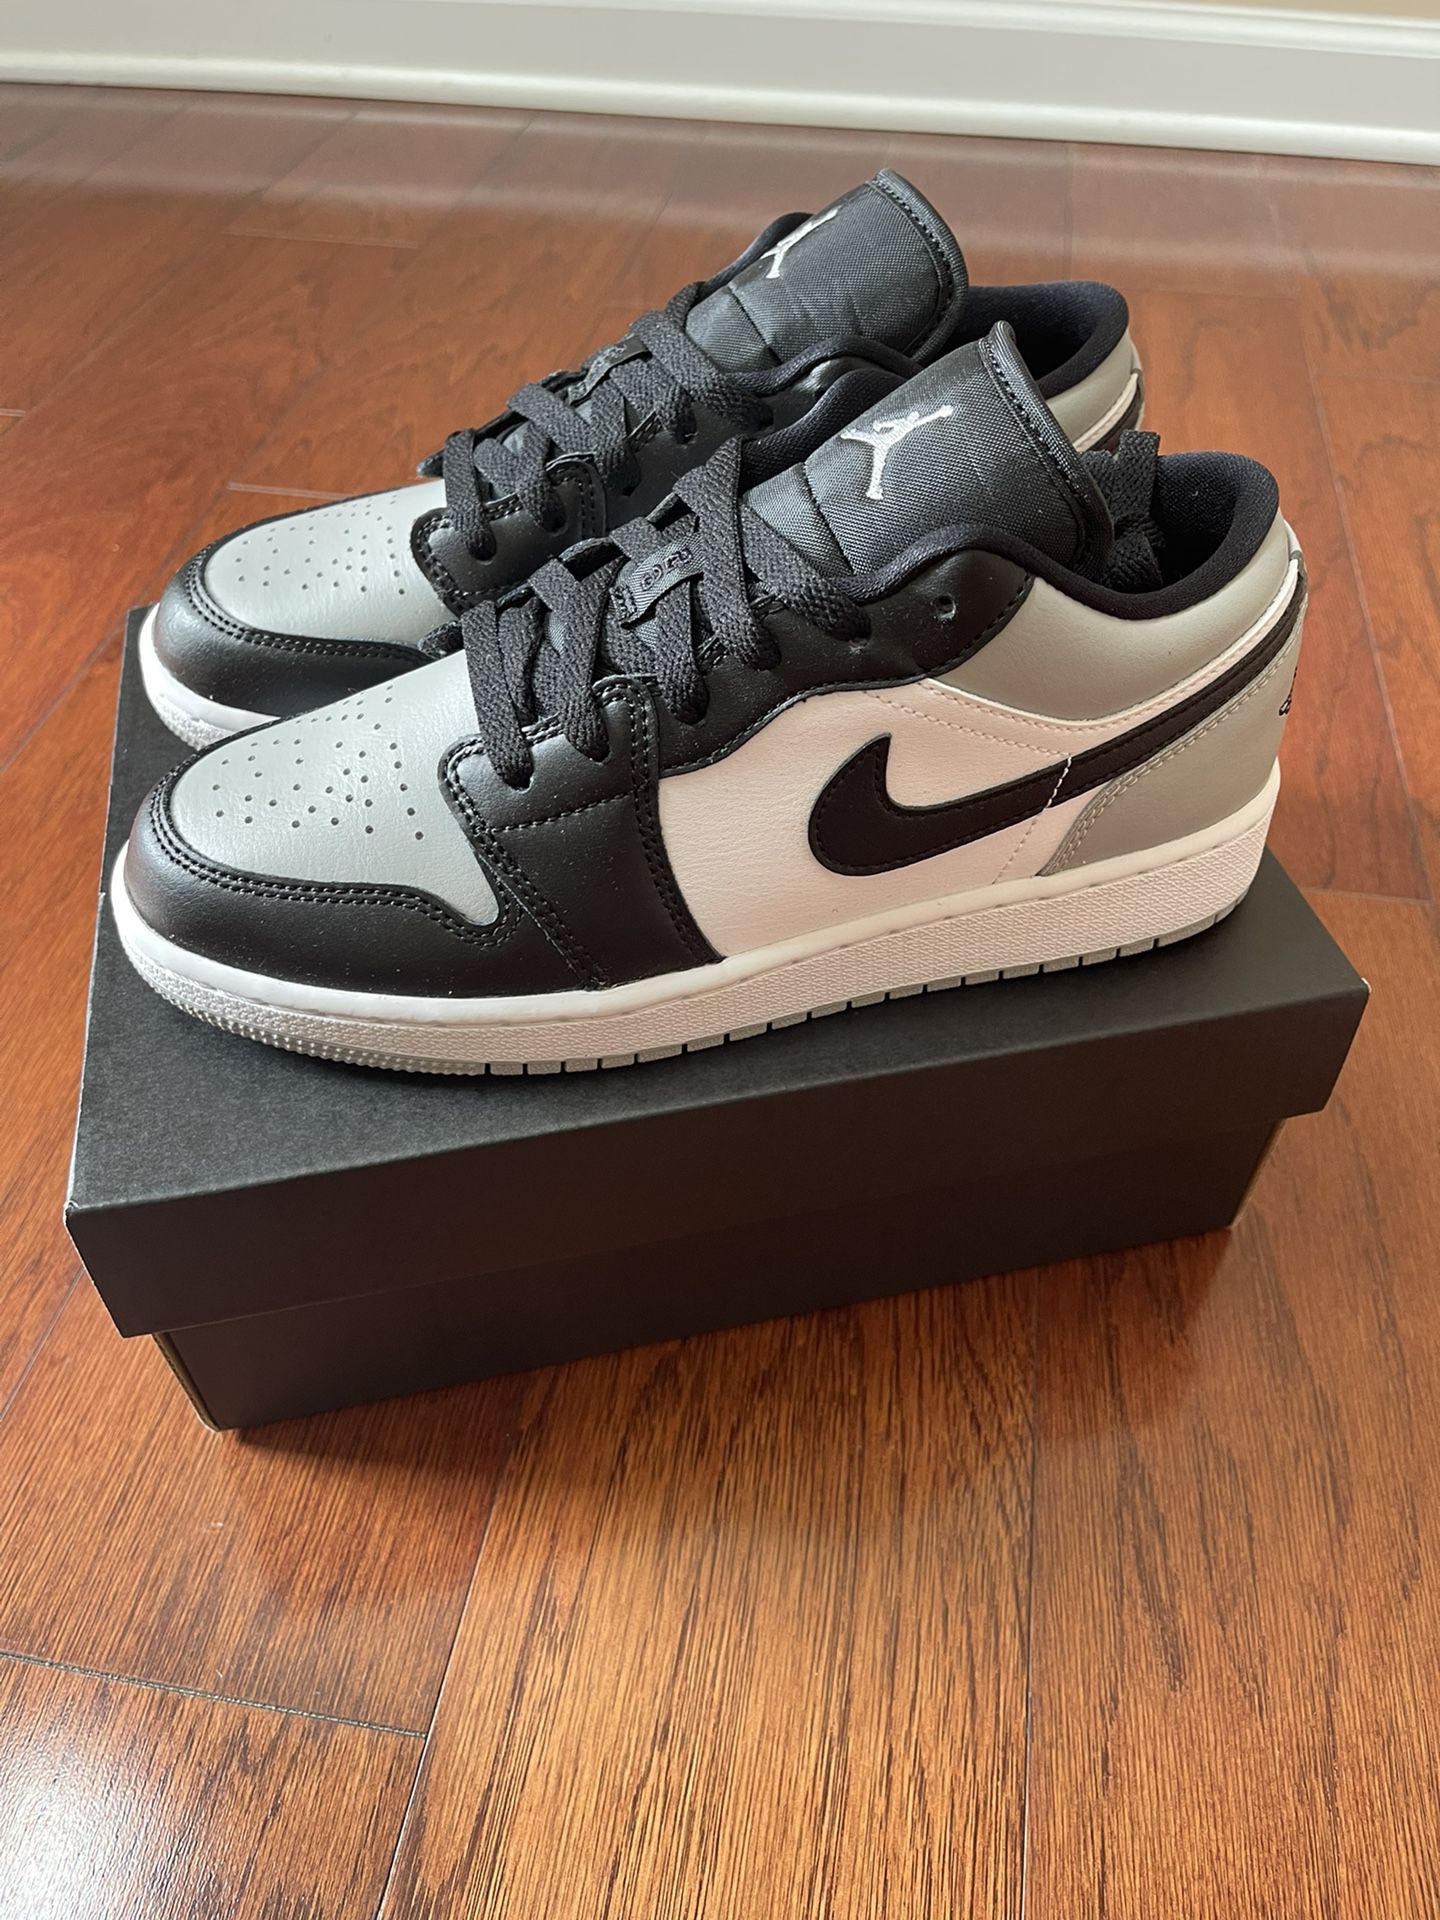 Air Jordan 1 Low Shadow Toe GS Size 5.5yW for Sale in